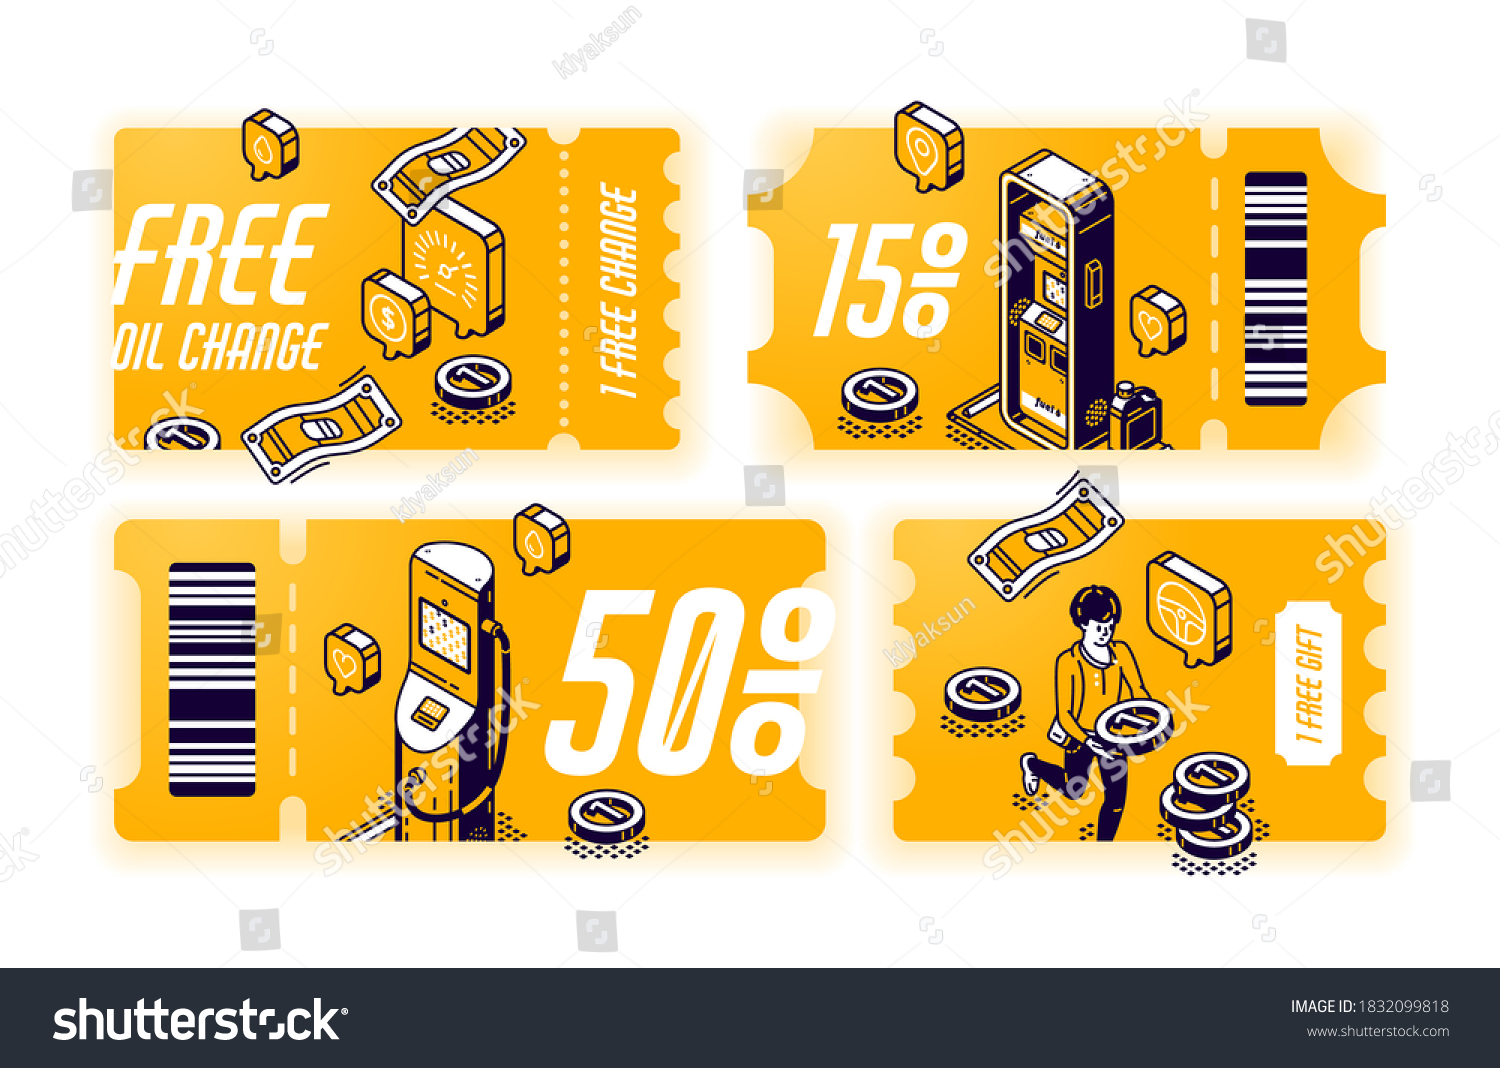 SVG of Yellow coupons for free oil change, vouchers with gift or discount for car service. Vector set of certificates with isometric illustration of gas station. Tickets with offer for vehicle maintenance svg